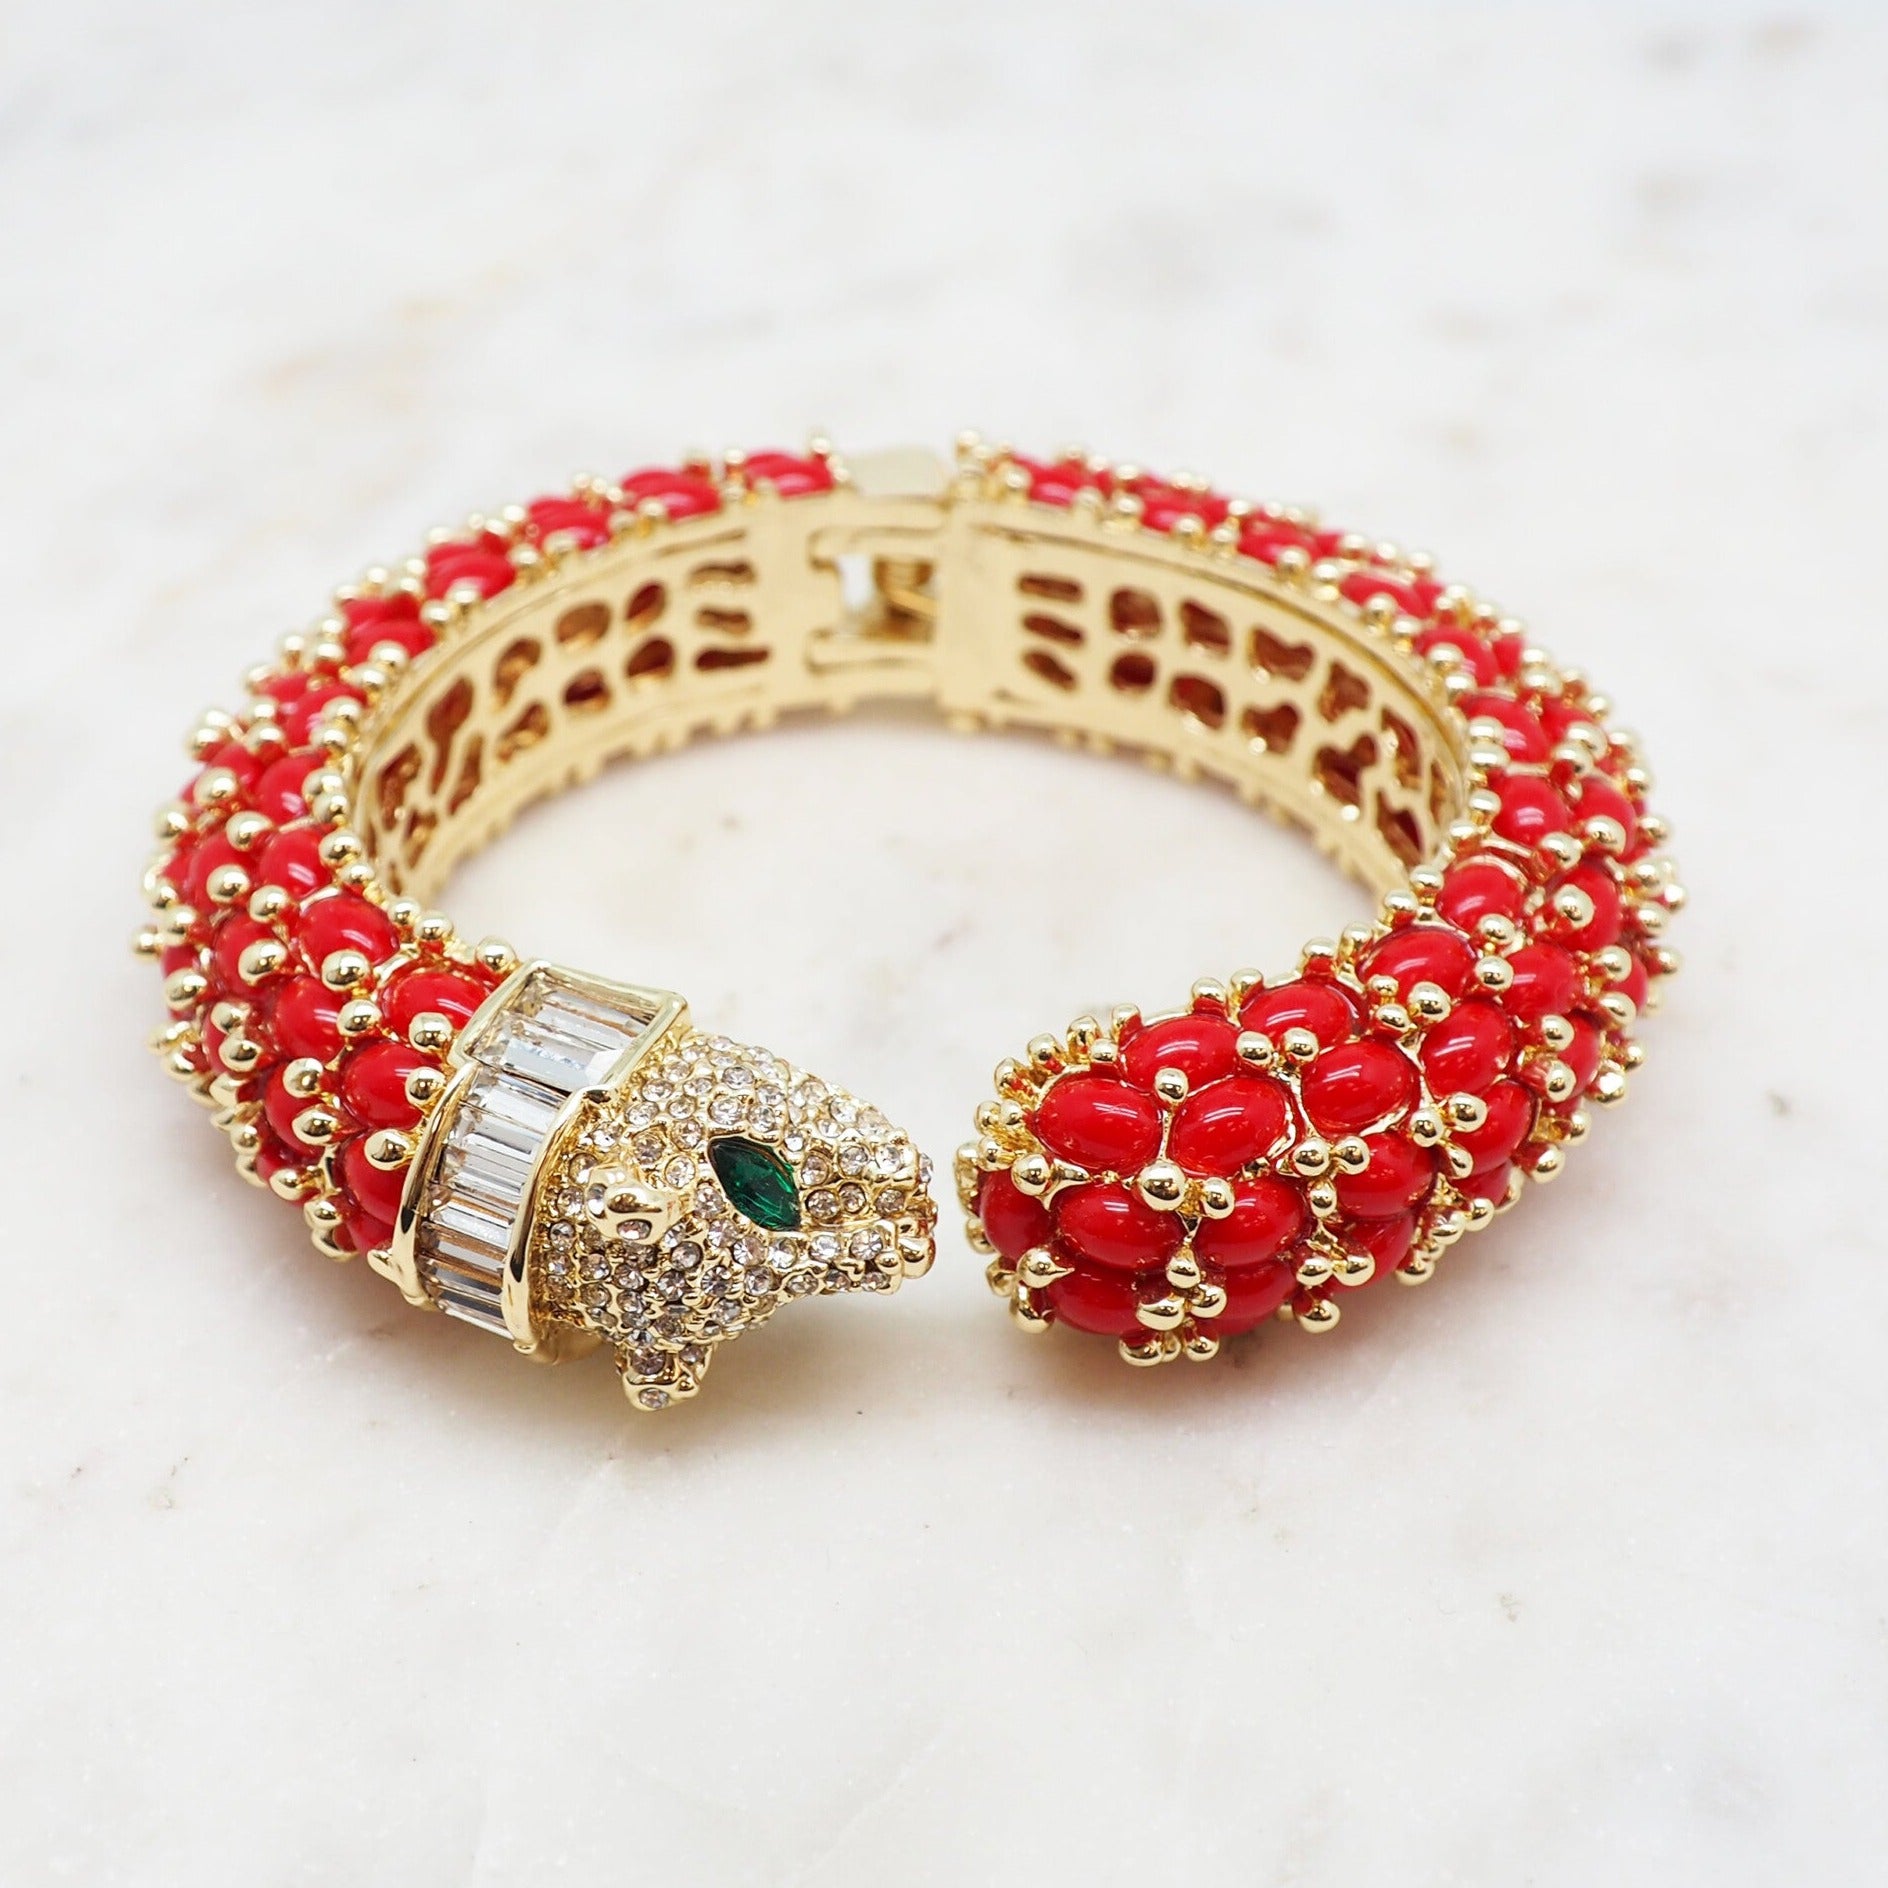 The Tiger Bangle - Red